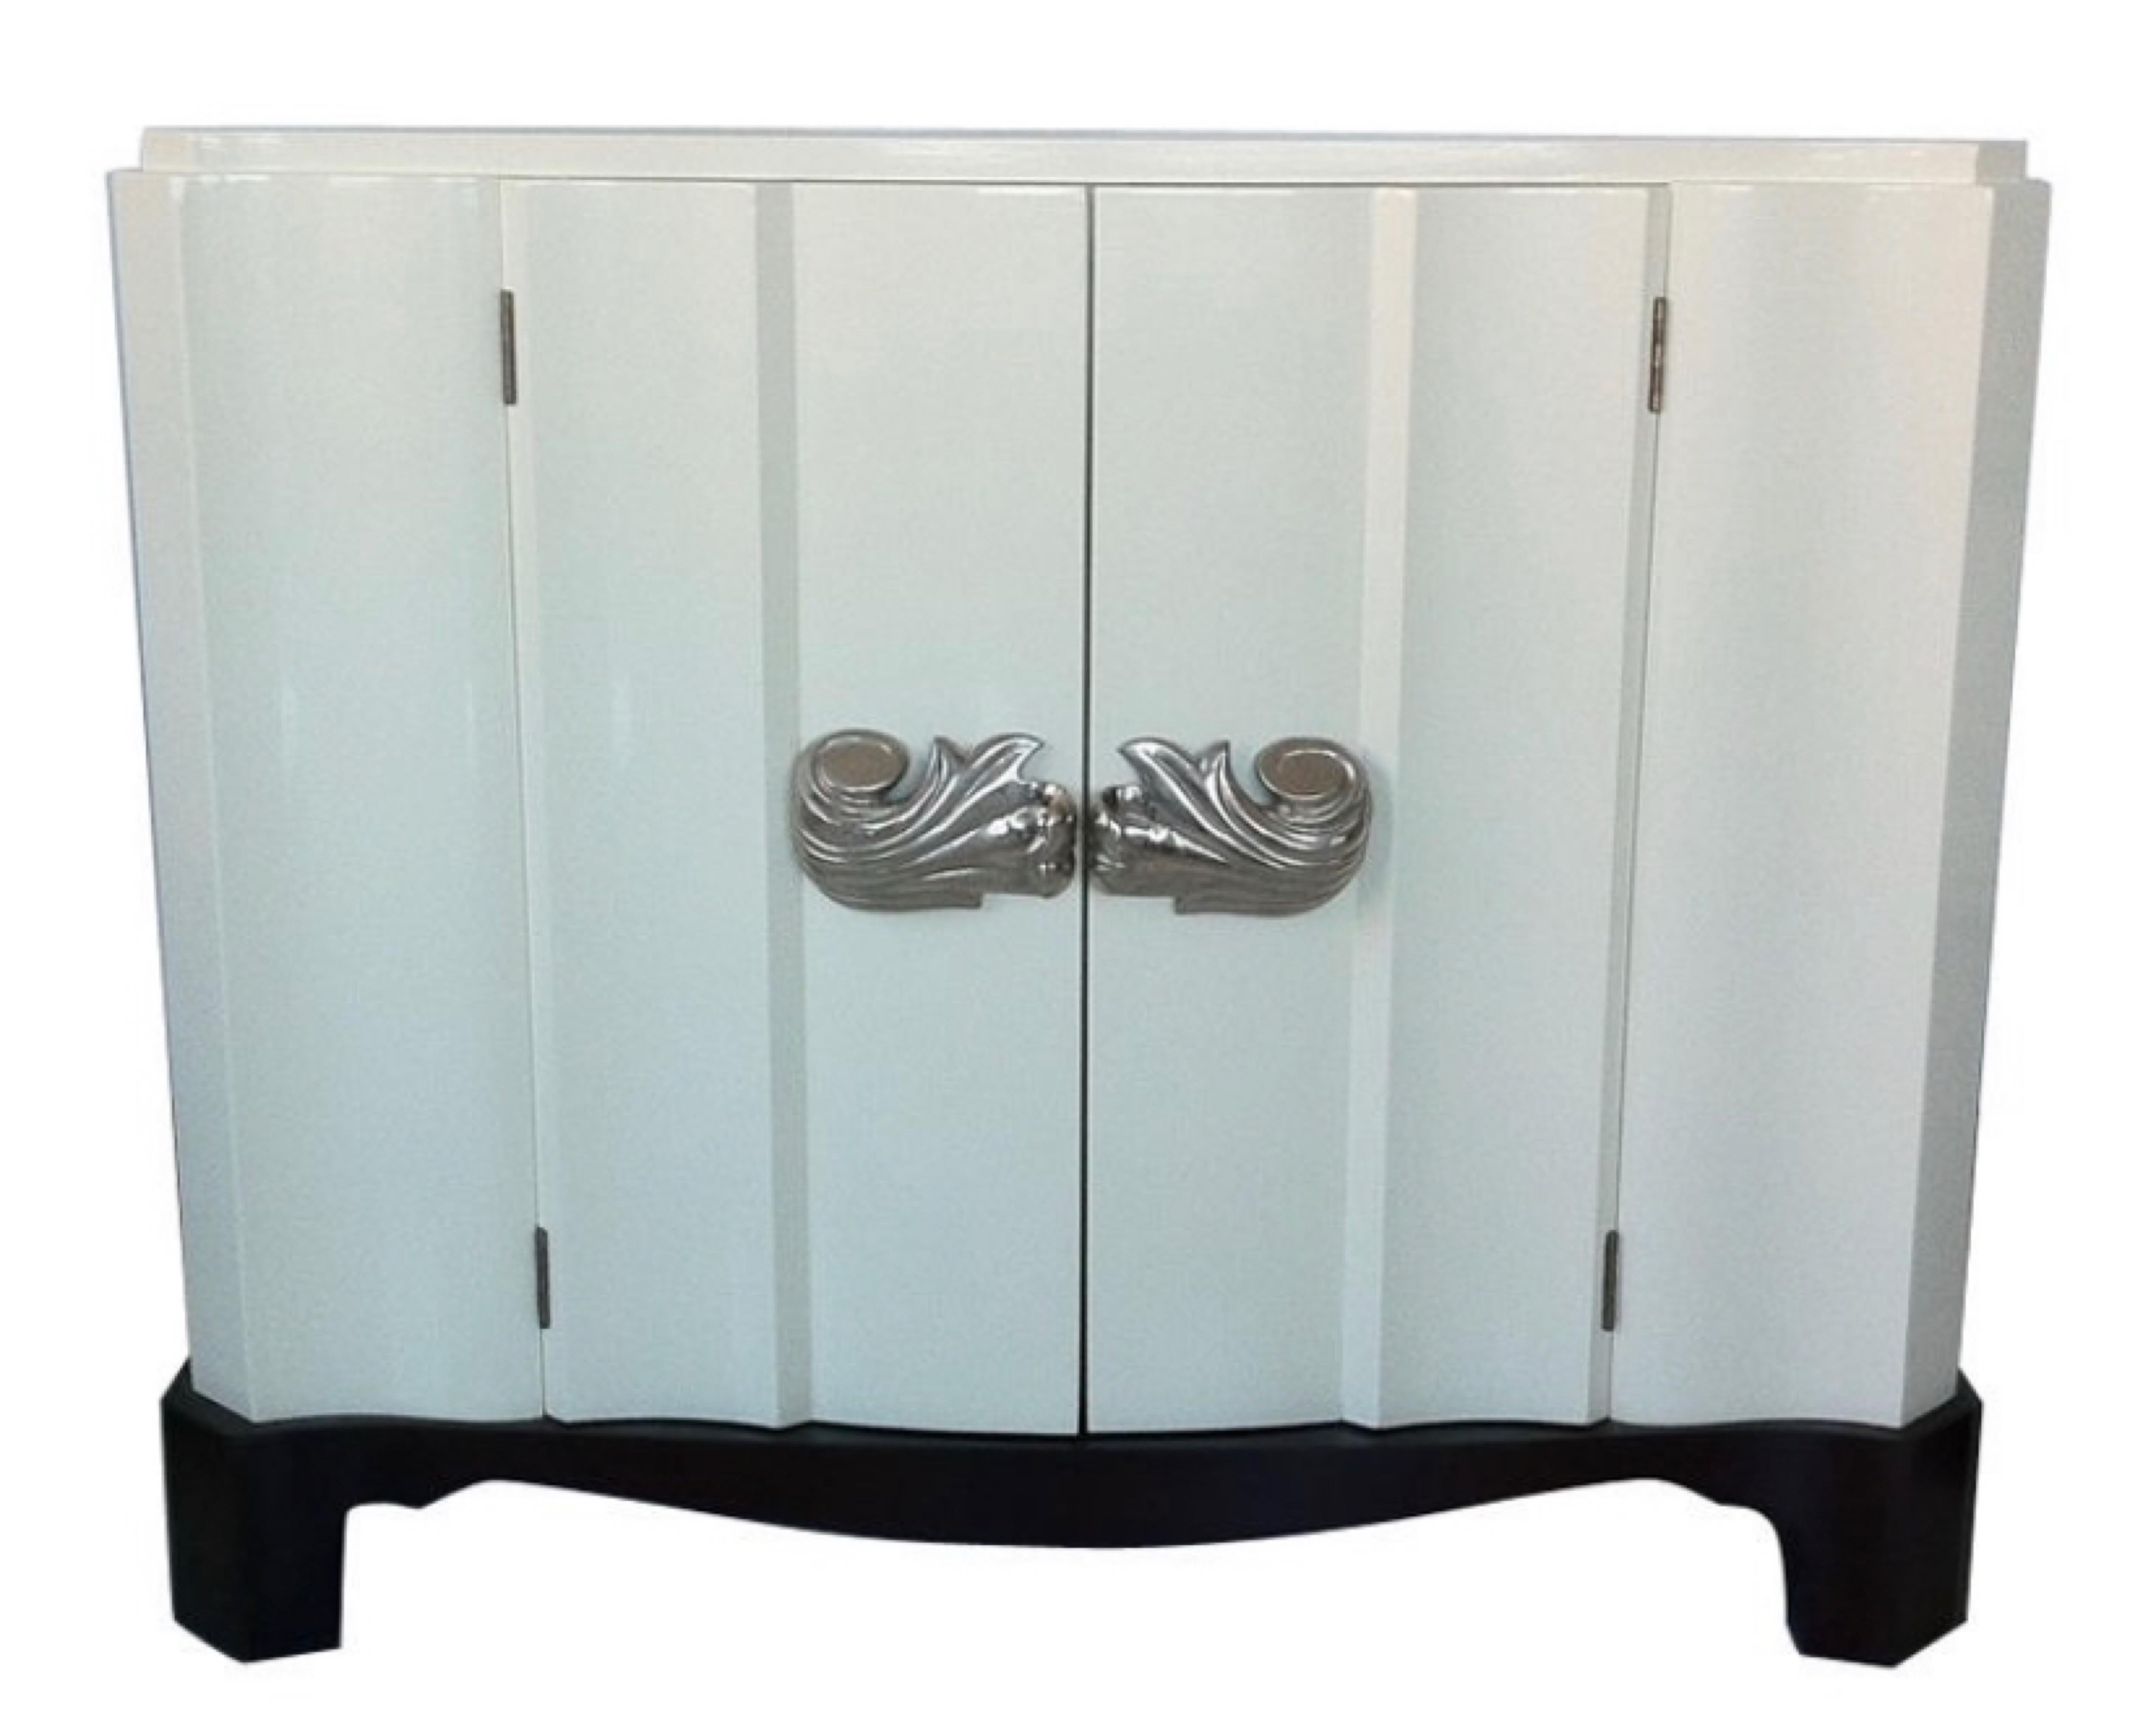 Stunning vintage Dorothy Draper serpentine cabinets in ivory lacquer with dark mahogany bases & beautiful silver nickel over bronze scroll pulls, circa 1940s. Great examples of Dorothy Drapers Modern Baroque style.

These chic chests could flank a